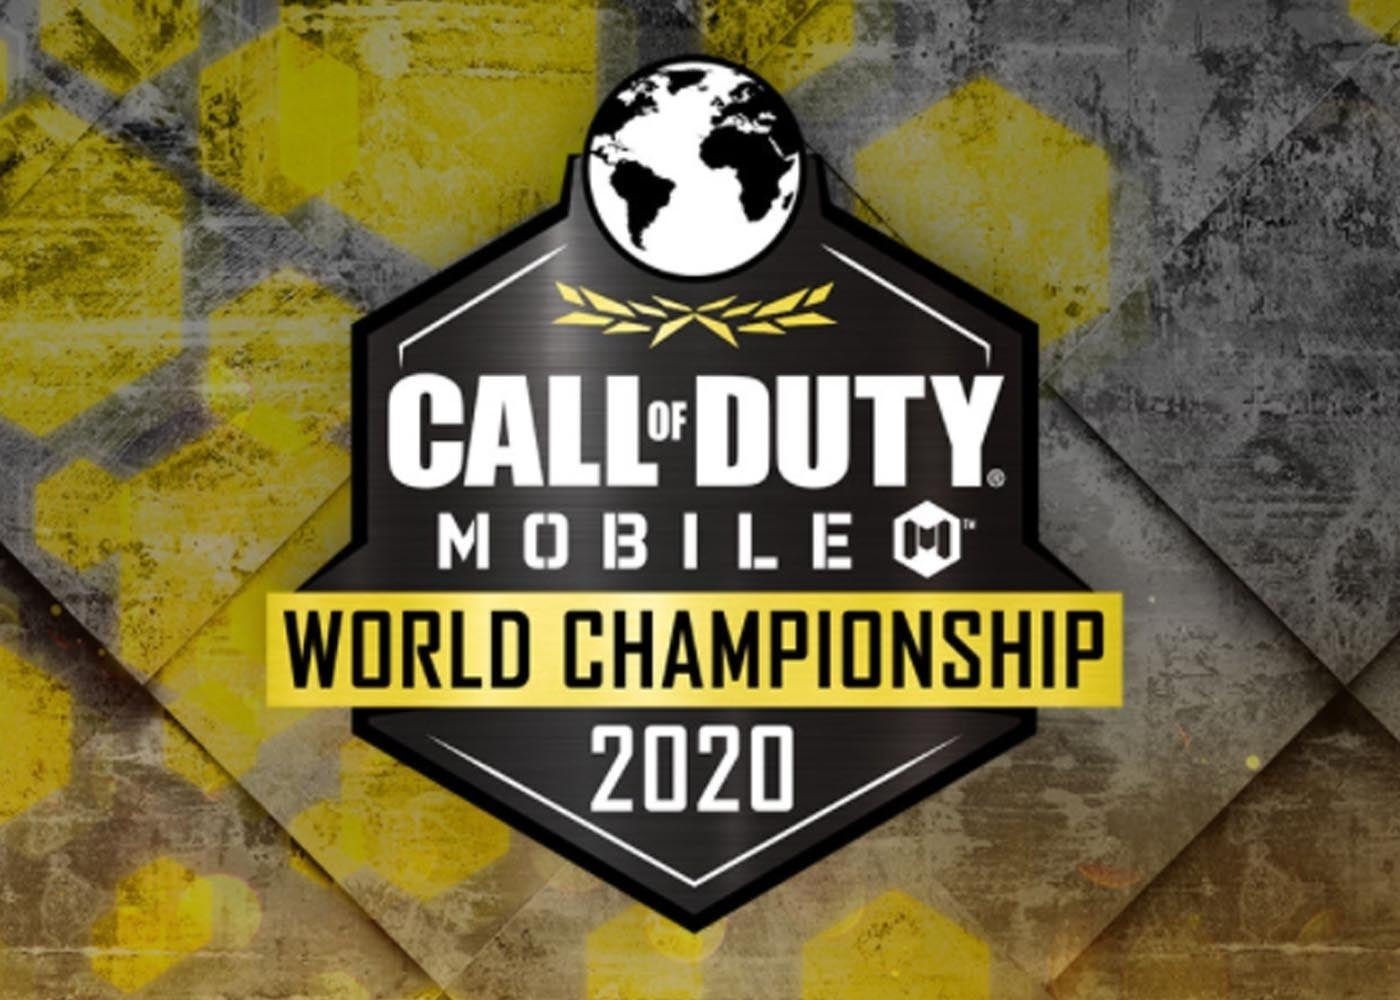 Call of duty mobile torneo